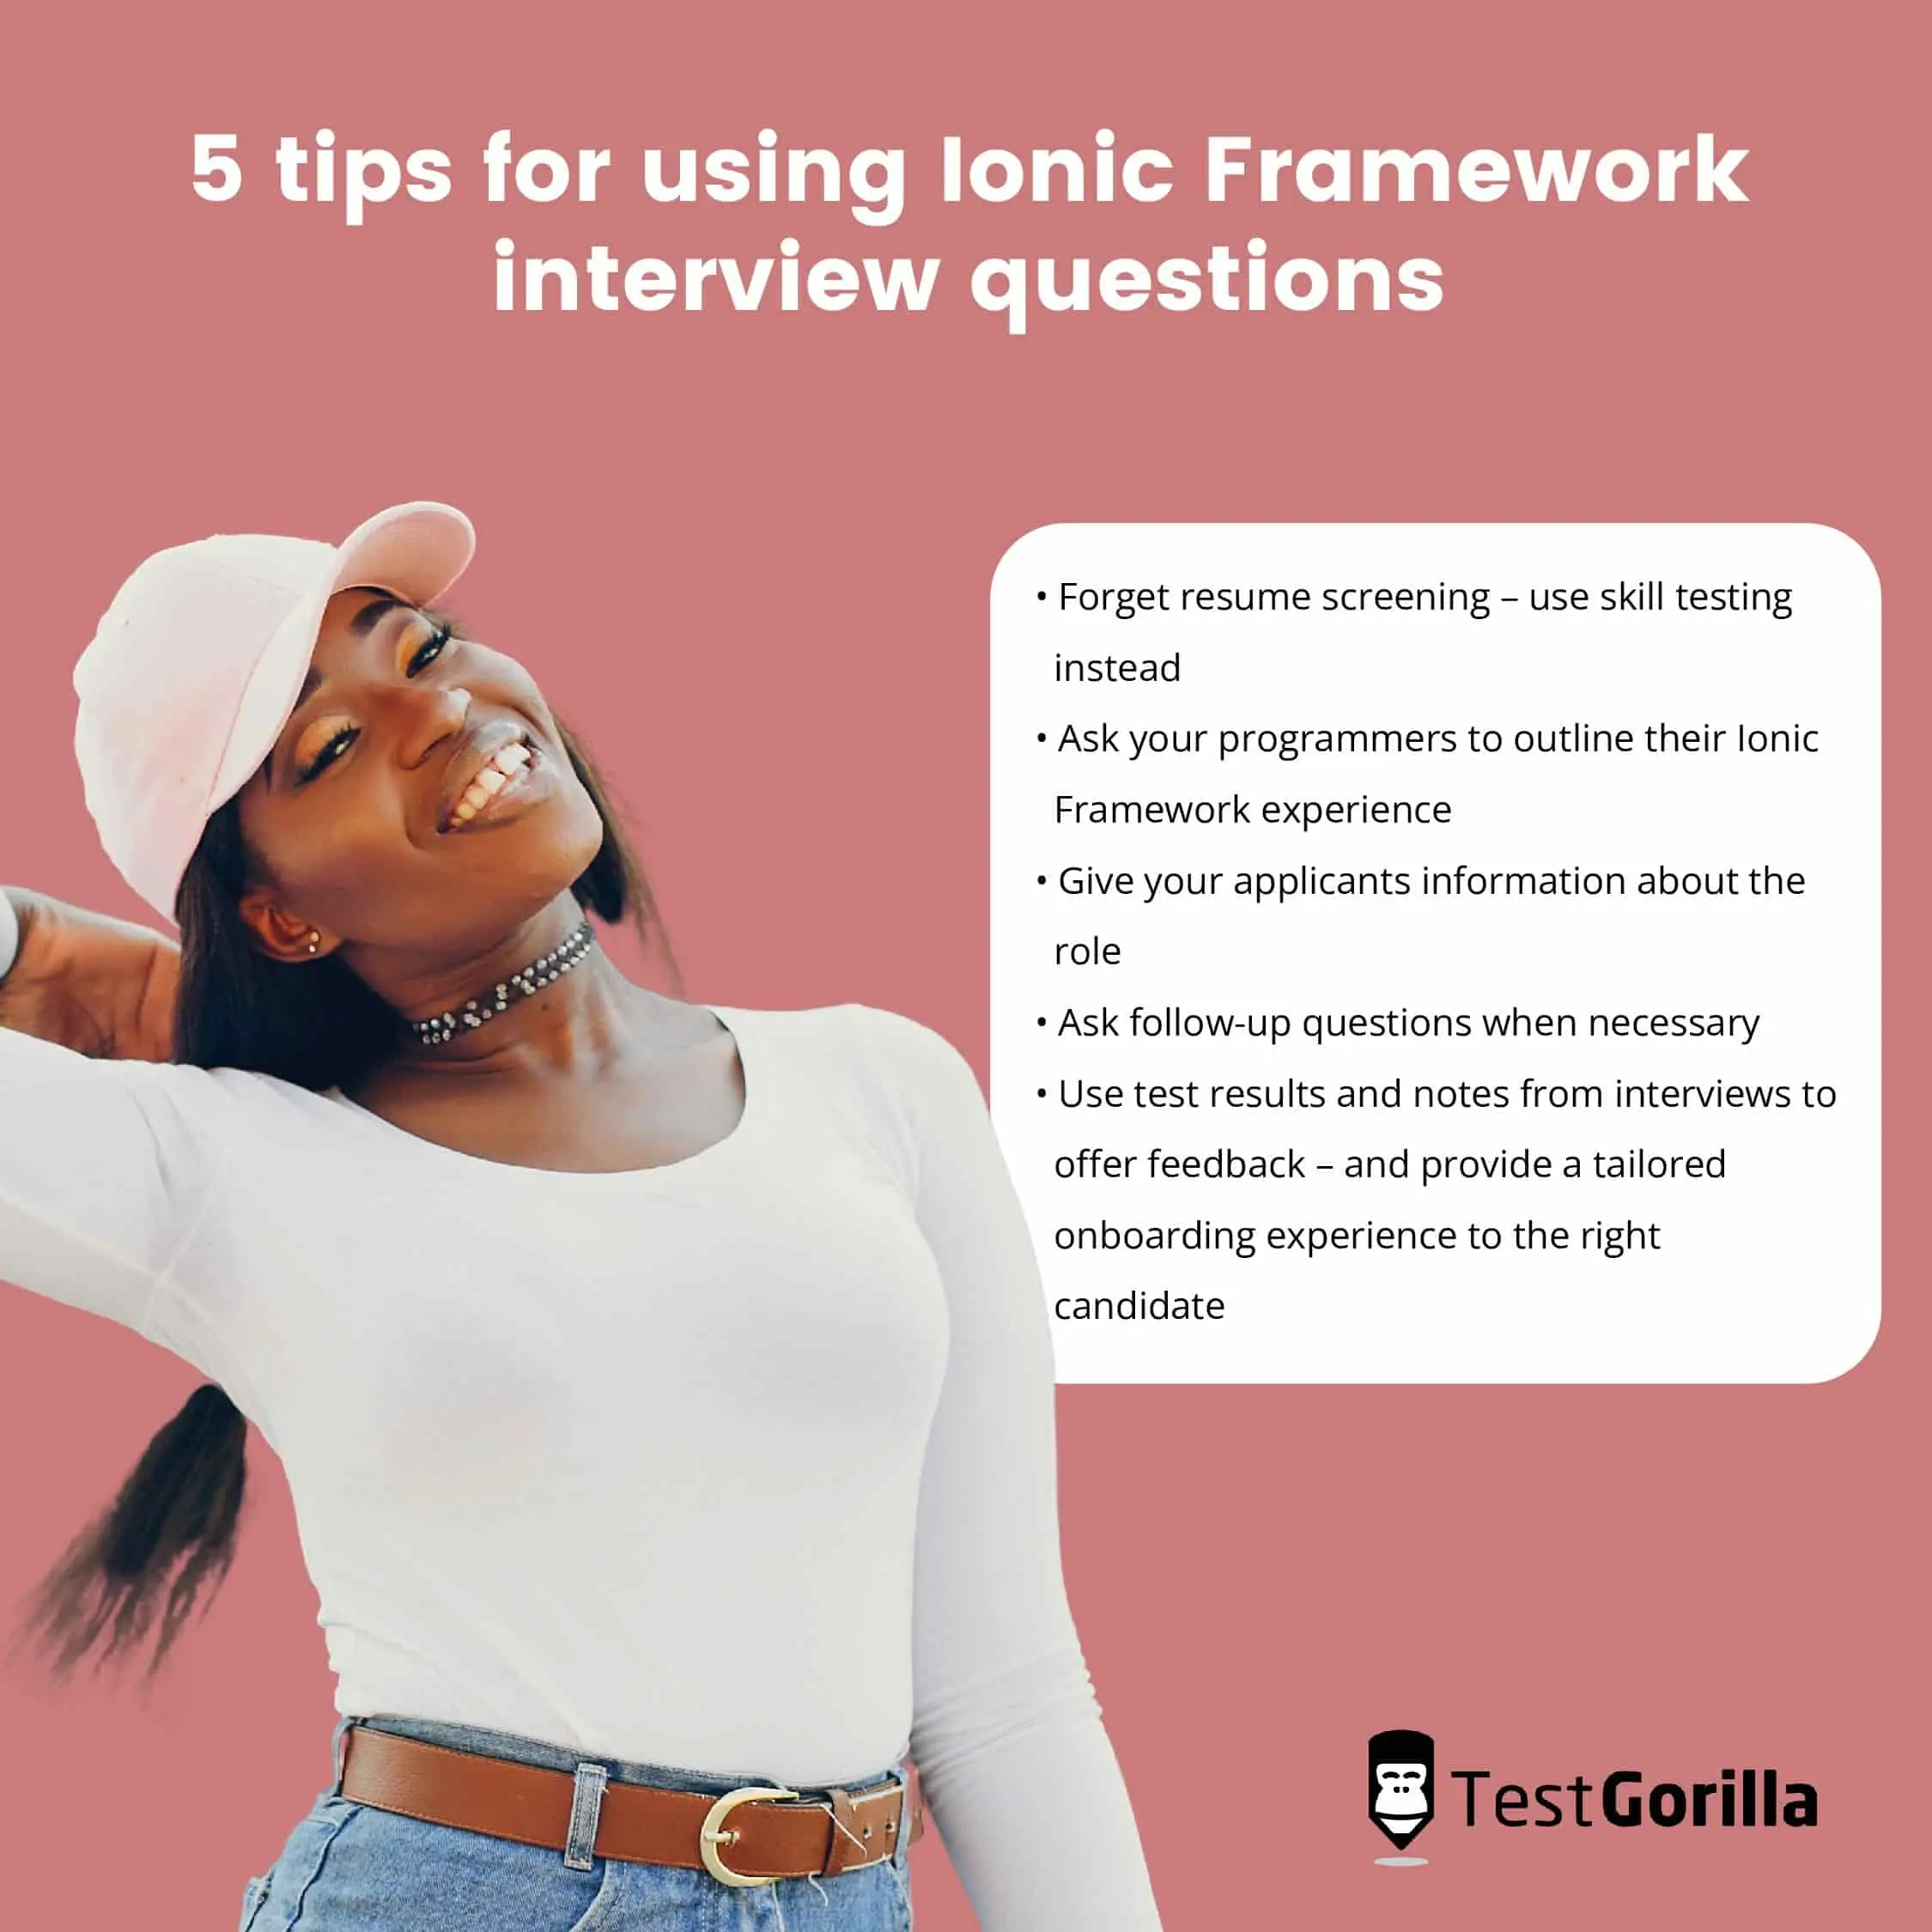 5 tips for using Ionic Framework interview questions